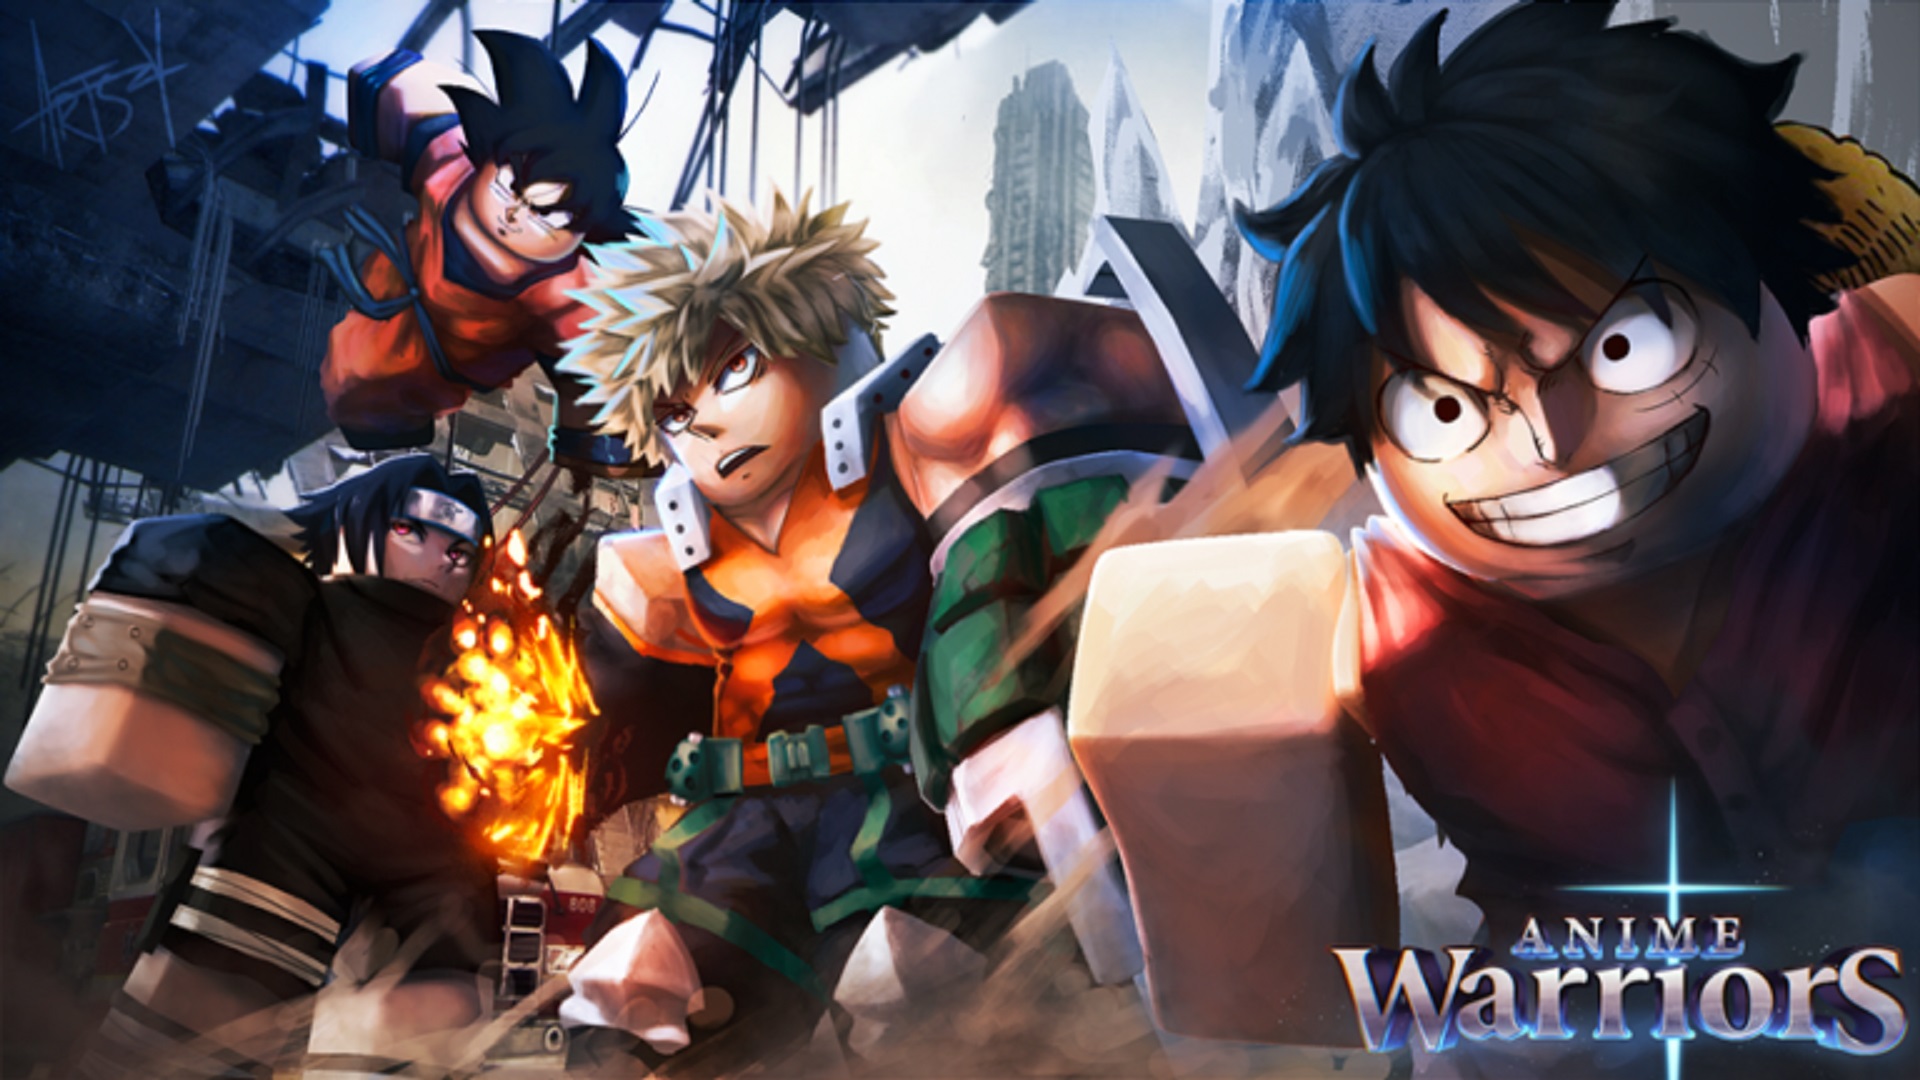 Anime Warriors on X: Anime Warriors releases later today. We'll post a day  1 release code for some free goodies soon! Also you'll be rewarded a free  Madara with any Battle Pass